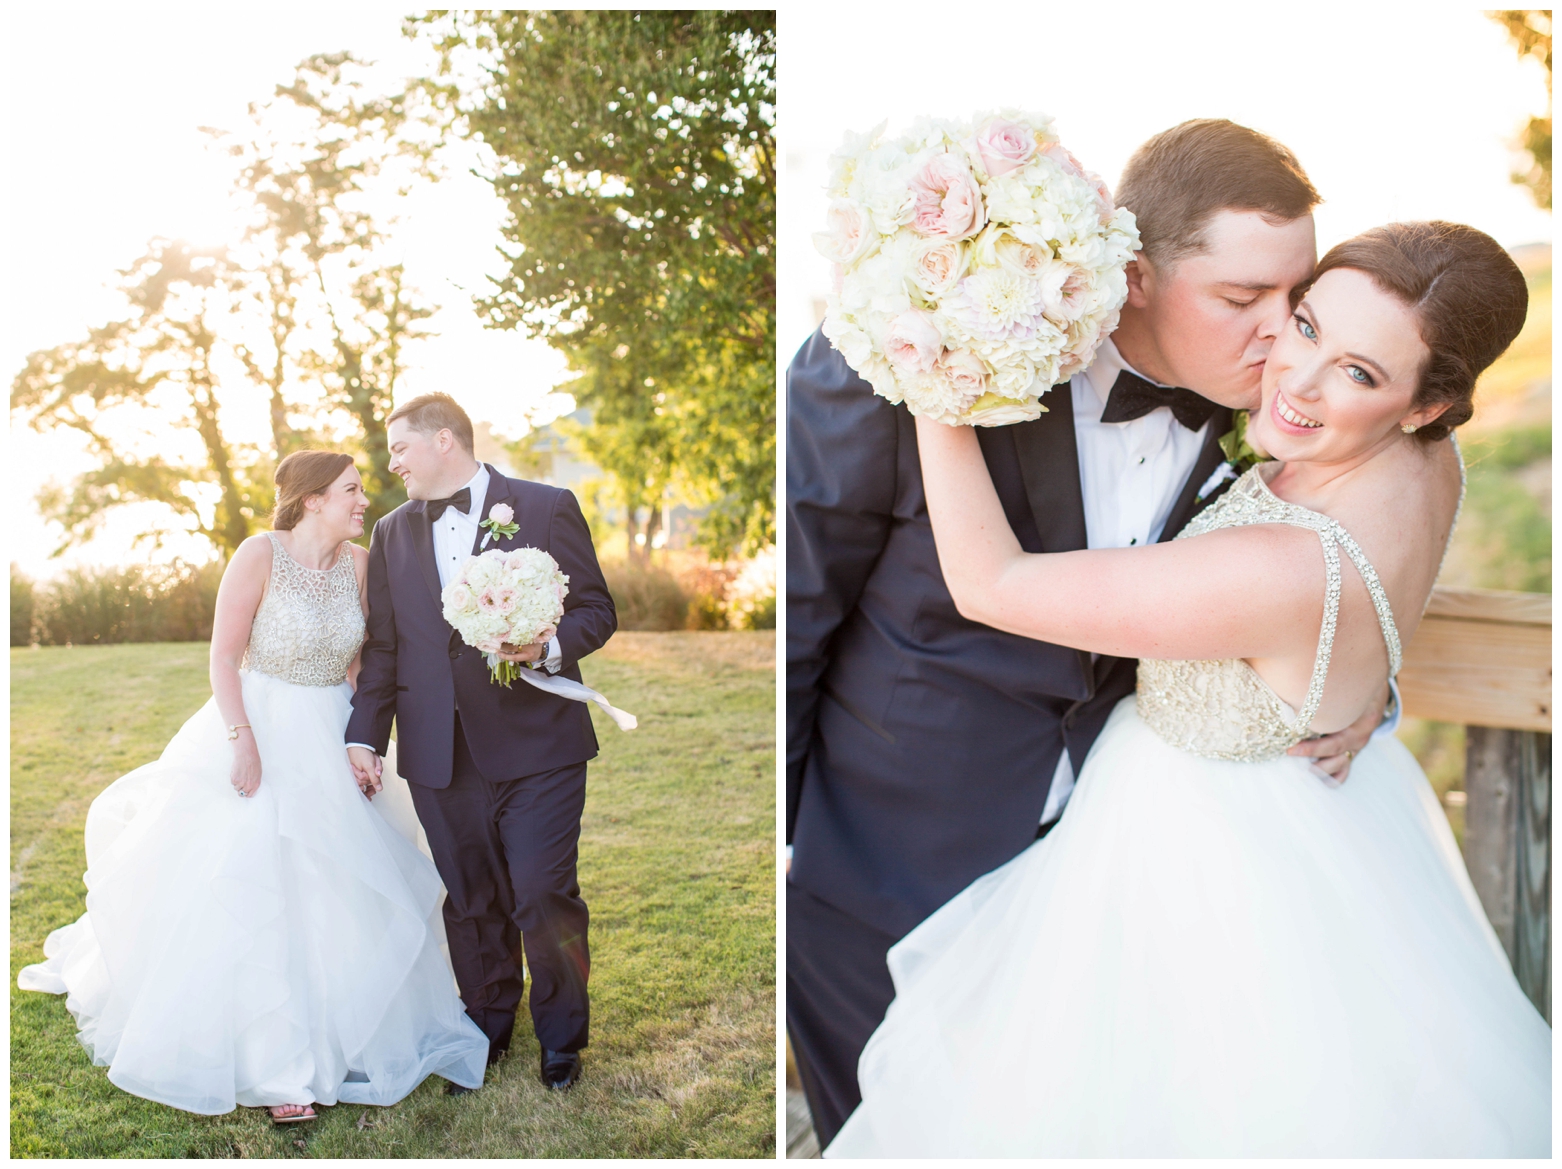 View More: http://hopetaylorphotographyphotos.pass.us/katelyn-and-bill